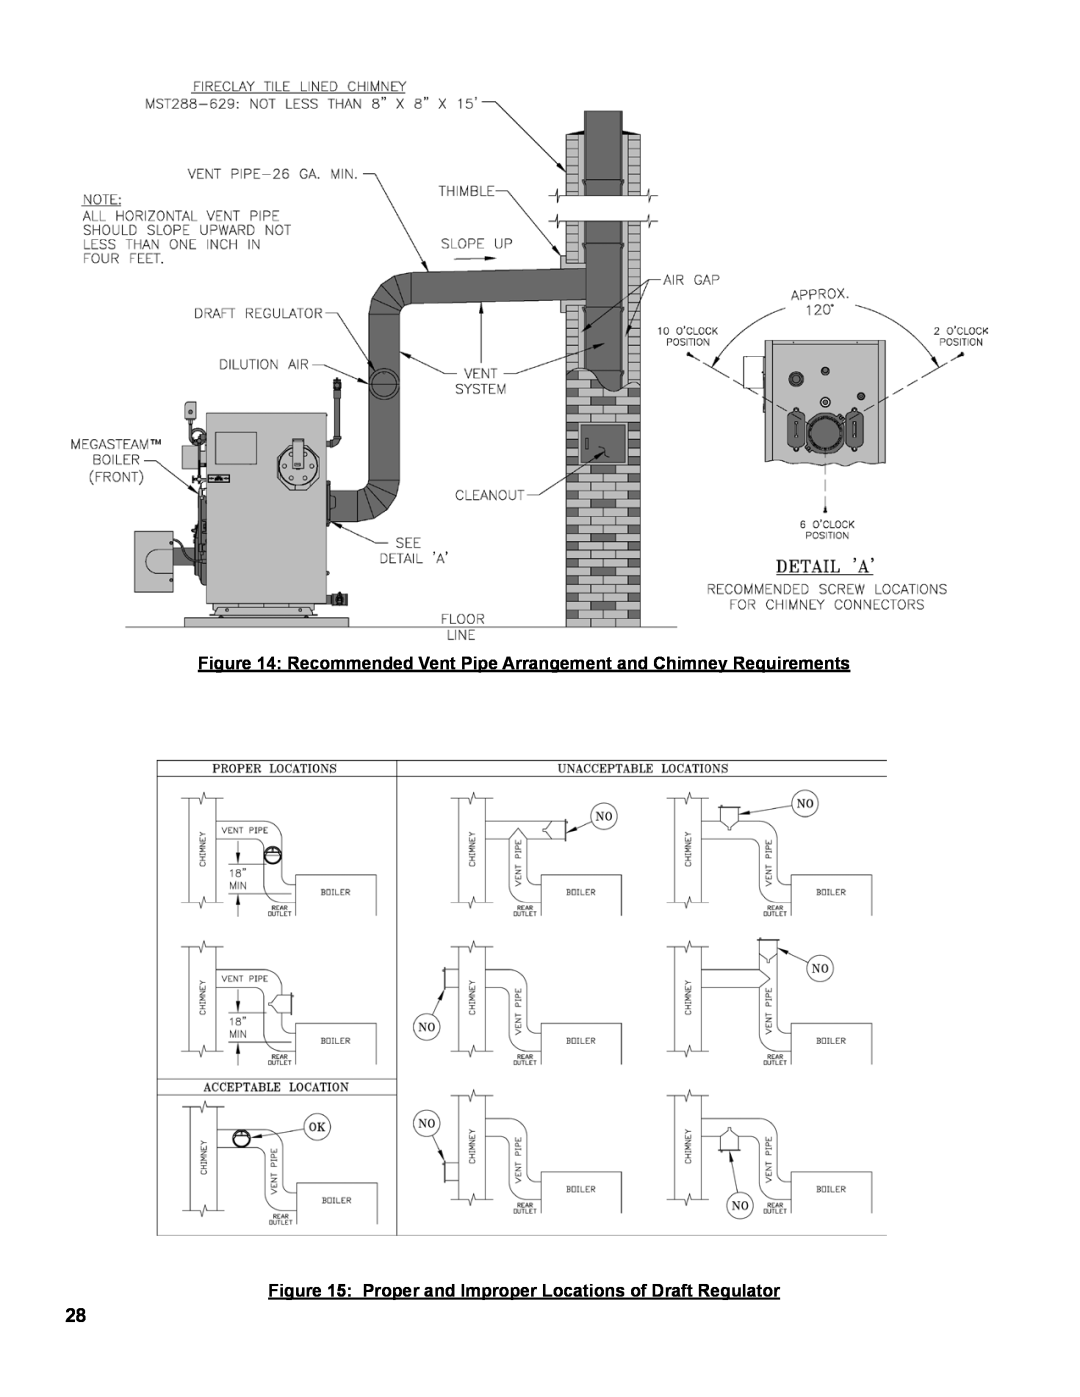 Burnham MST288, MST396, MST629, MST513 manual Recommended Vent Pipe Arrangement and Chimney Requirements 